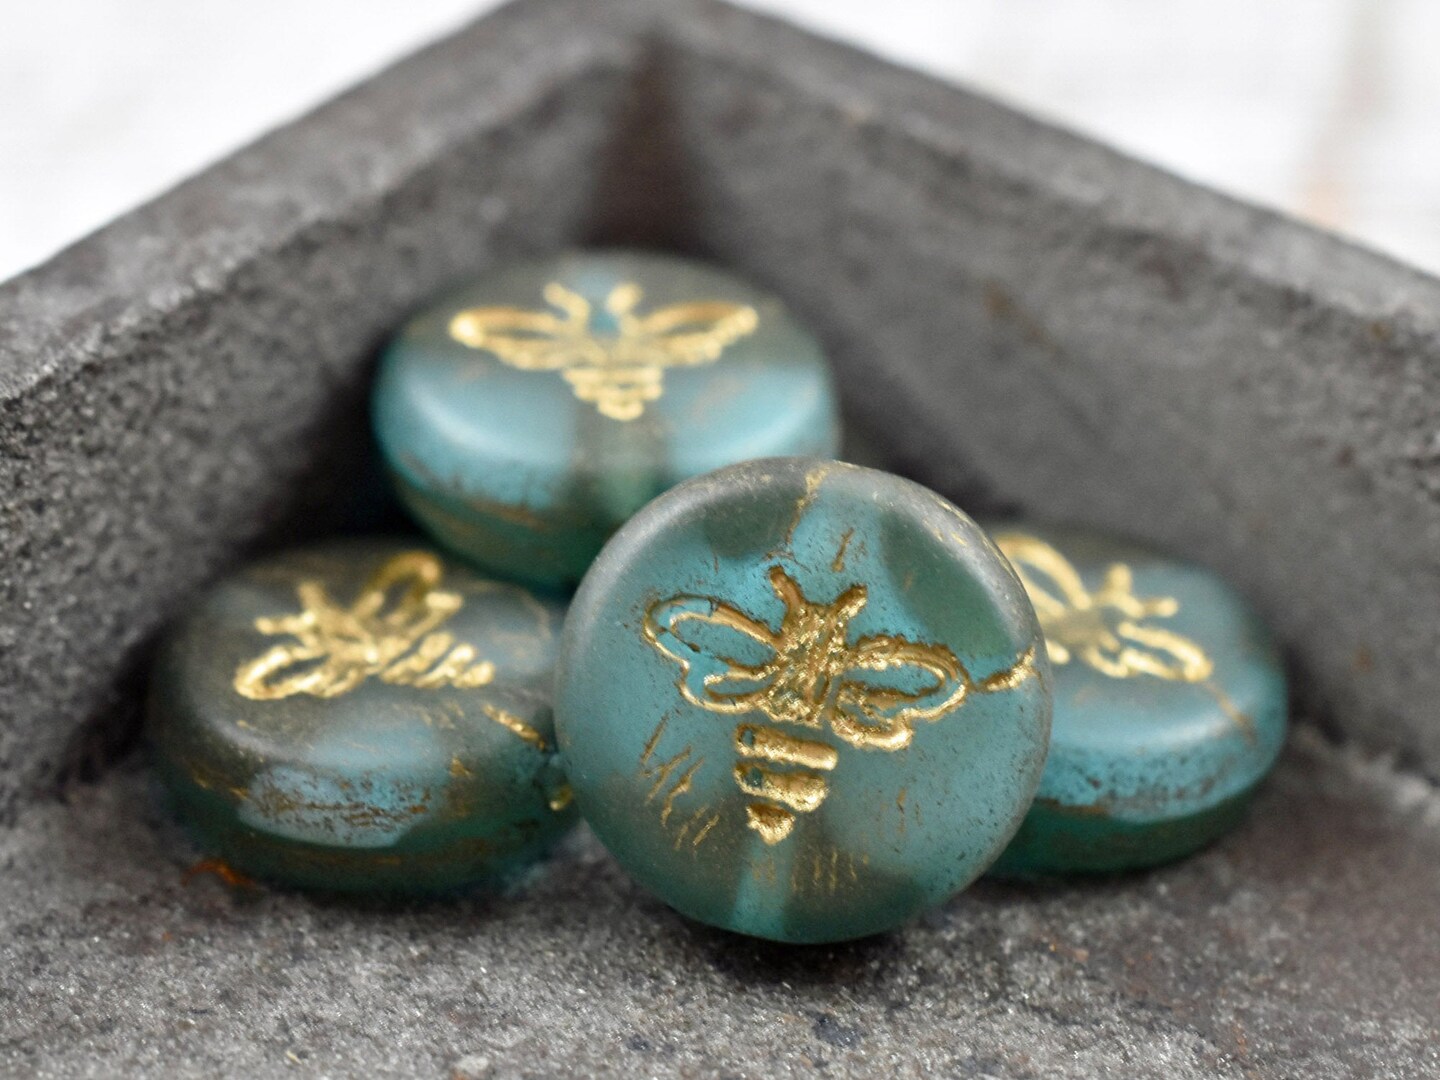 *6* 12mm Gold Washed Matte White Core Green Aqua Bee Coin Beads